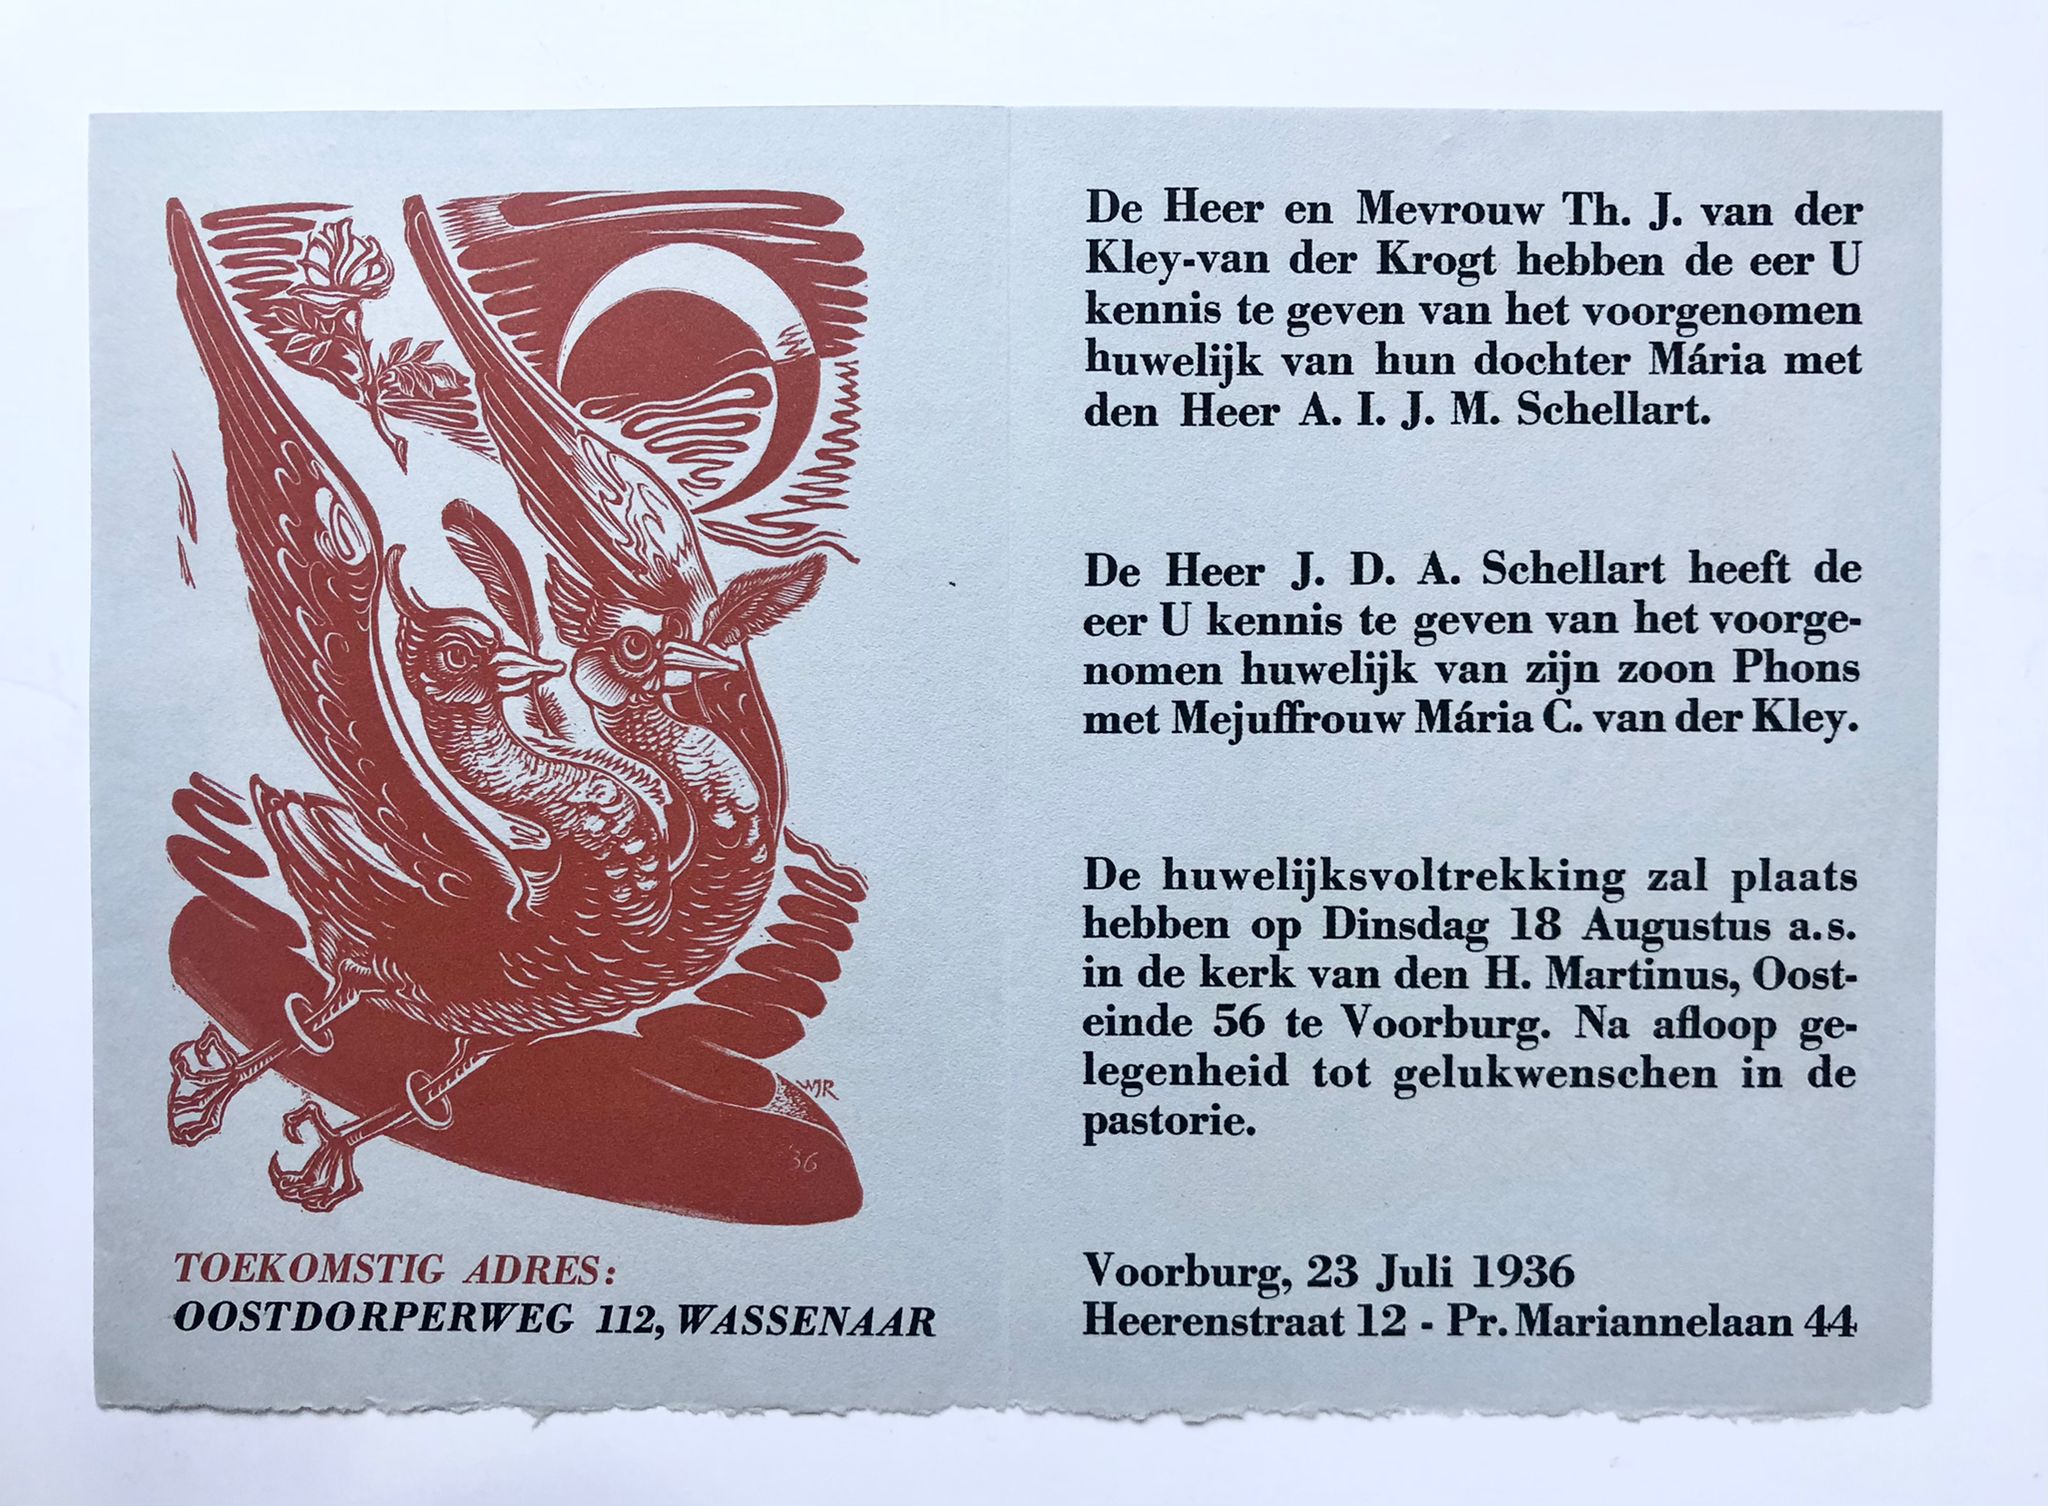 [Printed marriage announcement, modern woodcut, 1936] Beautiful marriage announcement of A.I.J.M. Schellart and Maria C. van der Kley with woodcut of two birds with rings on the legs. Voorburg 1936. 2 p.